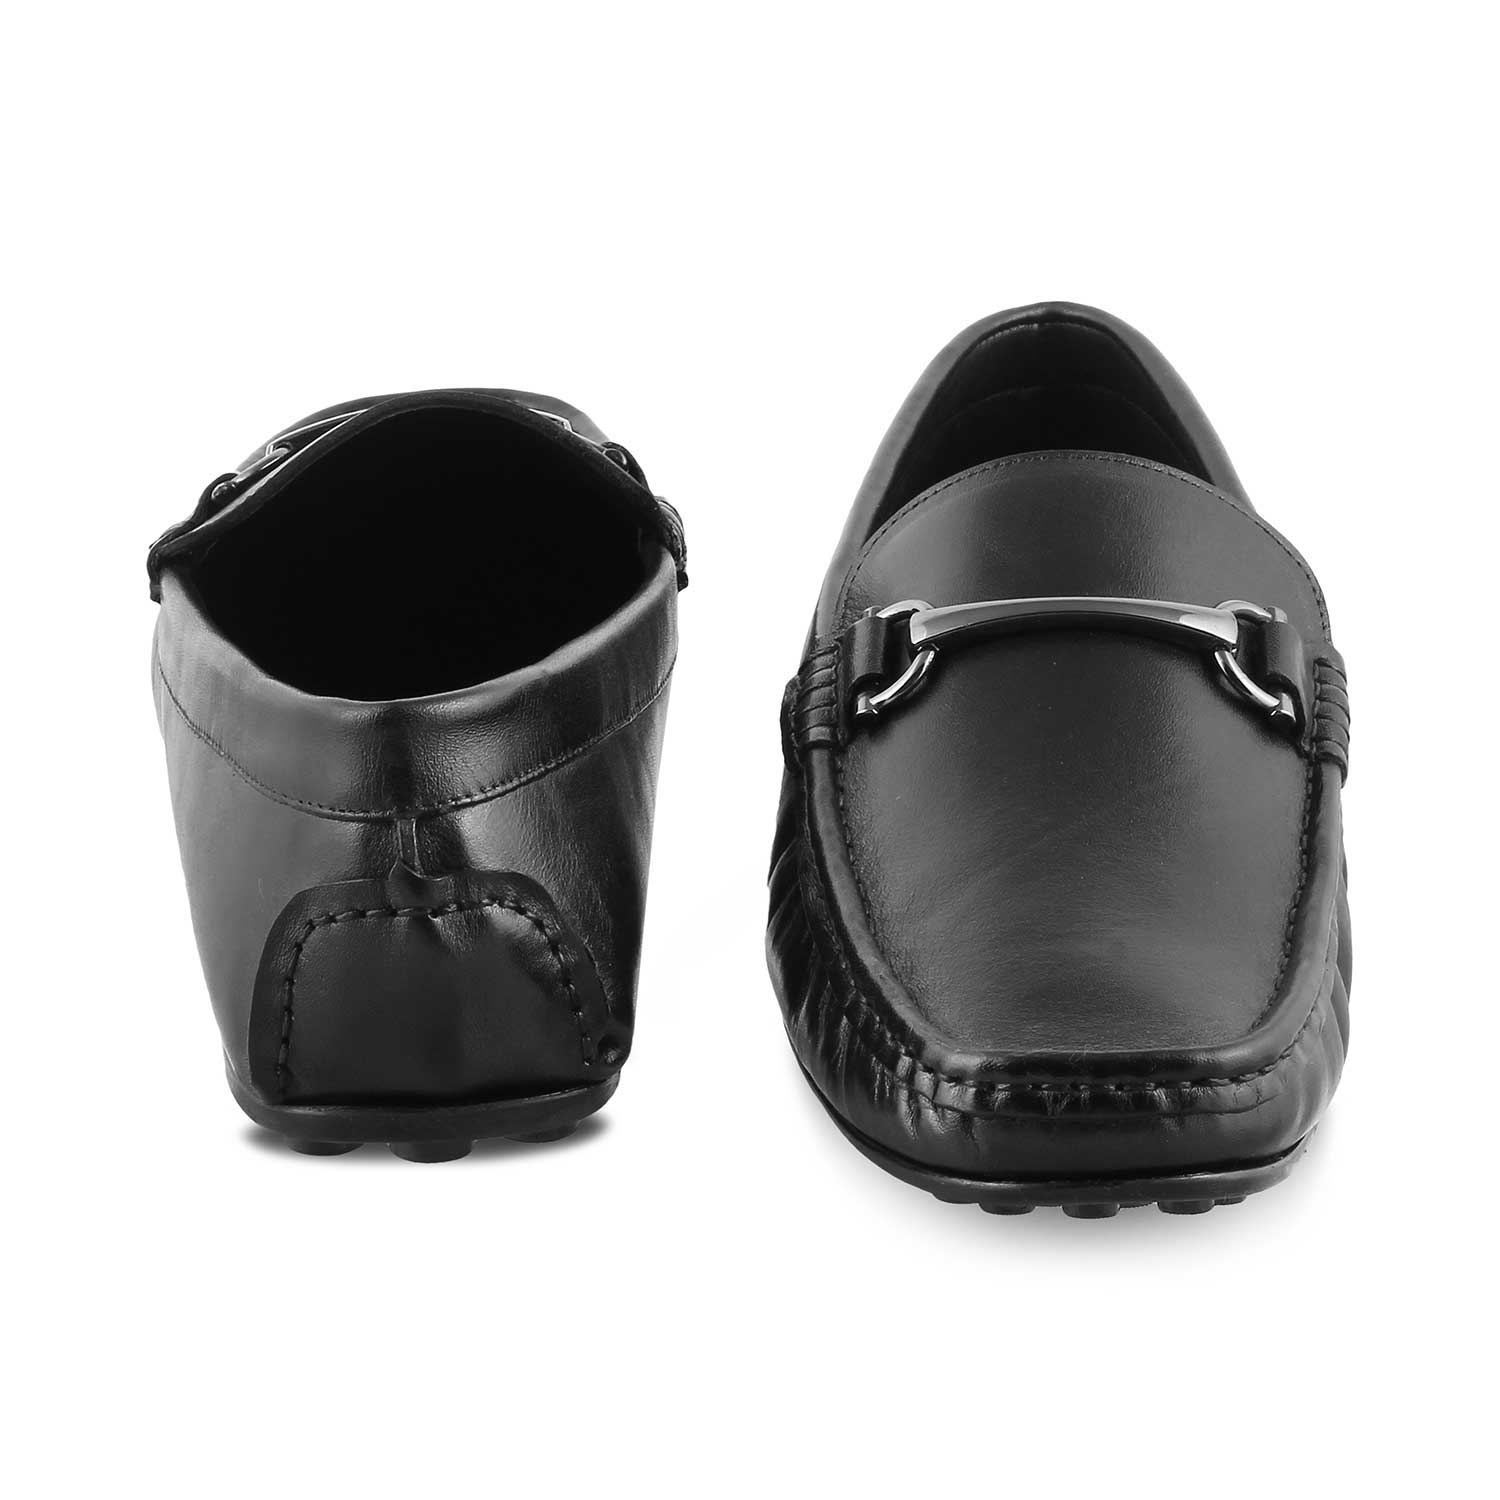 Tresmode-The Cecomf Black Men's Leather Driving Loafers Tresmode-Tresmode